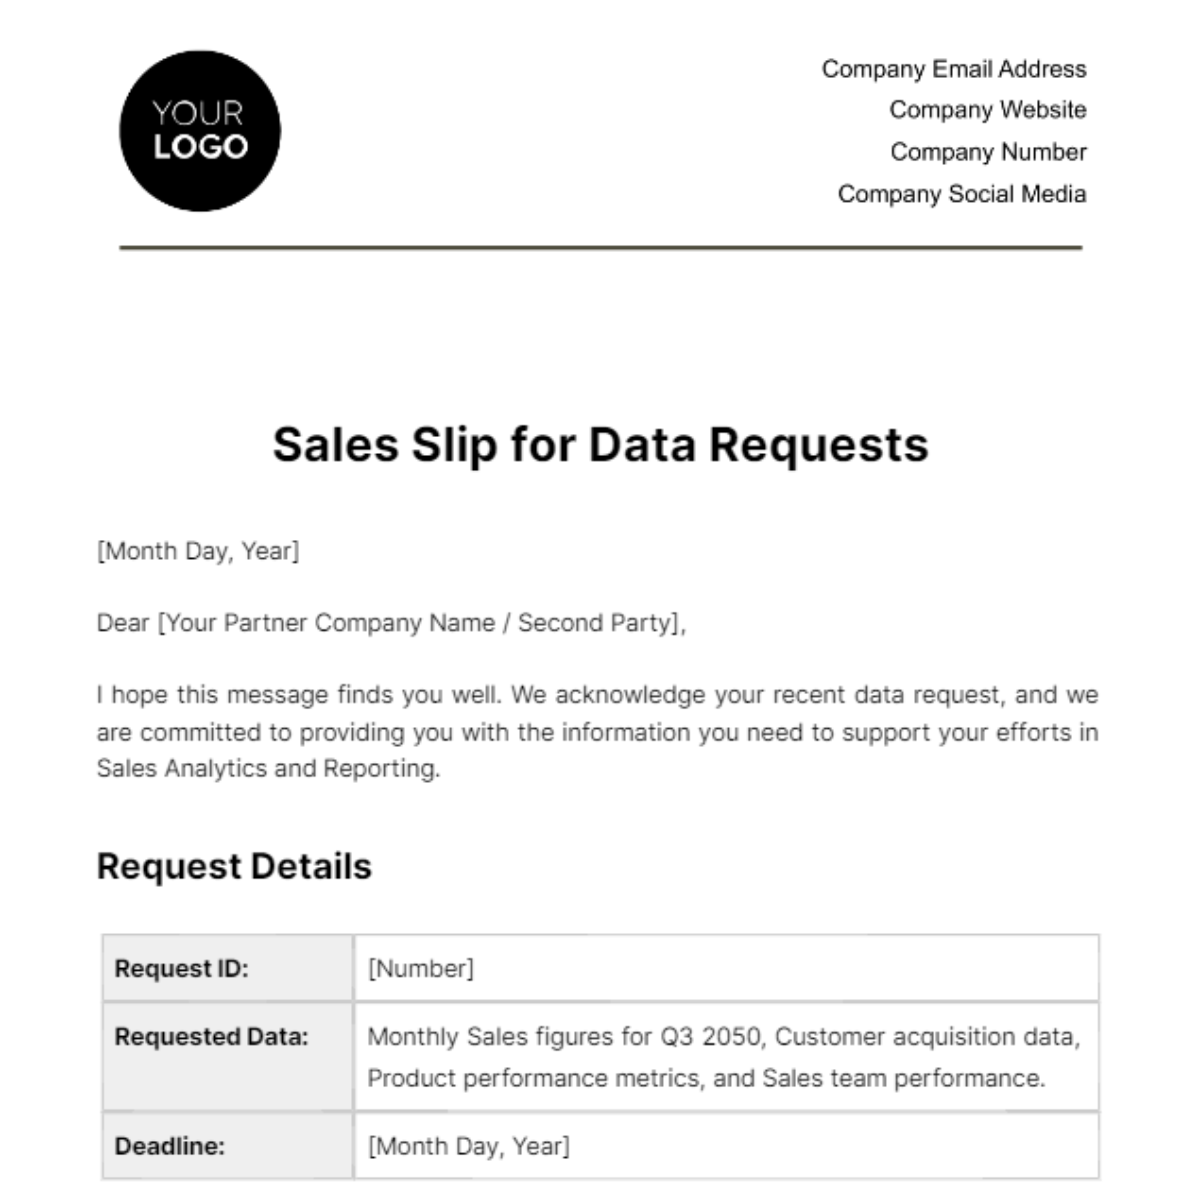 Sales Slip for Data Requests Template